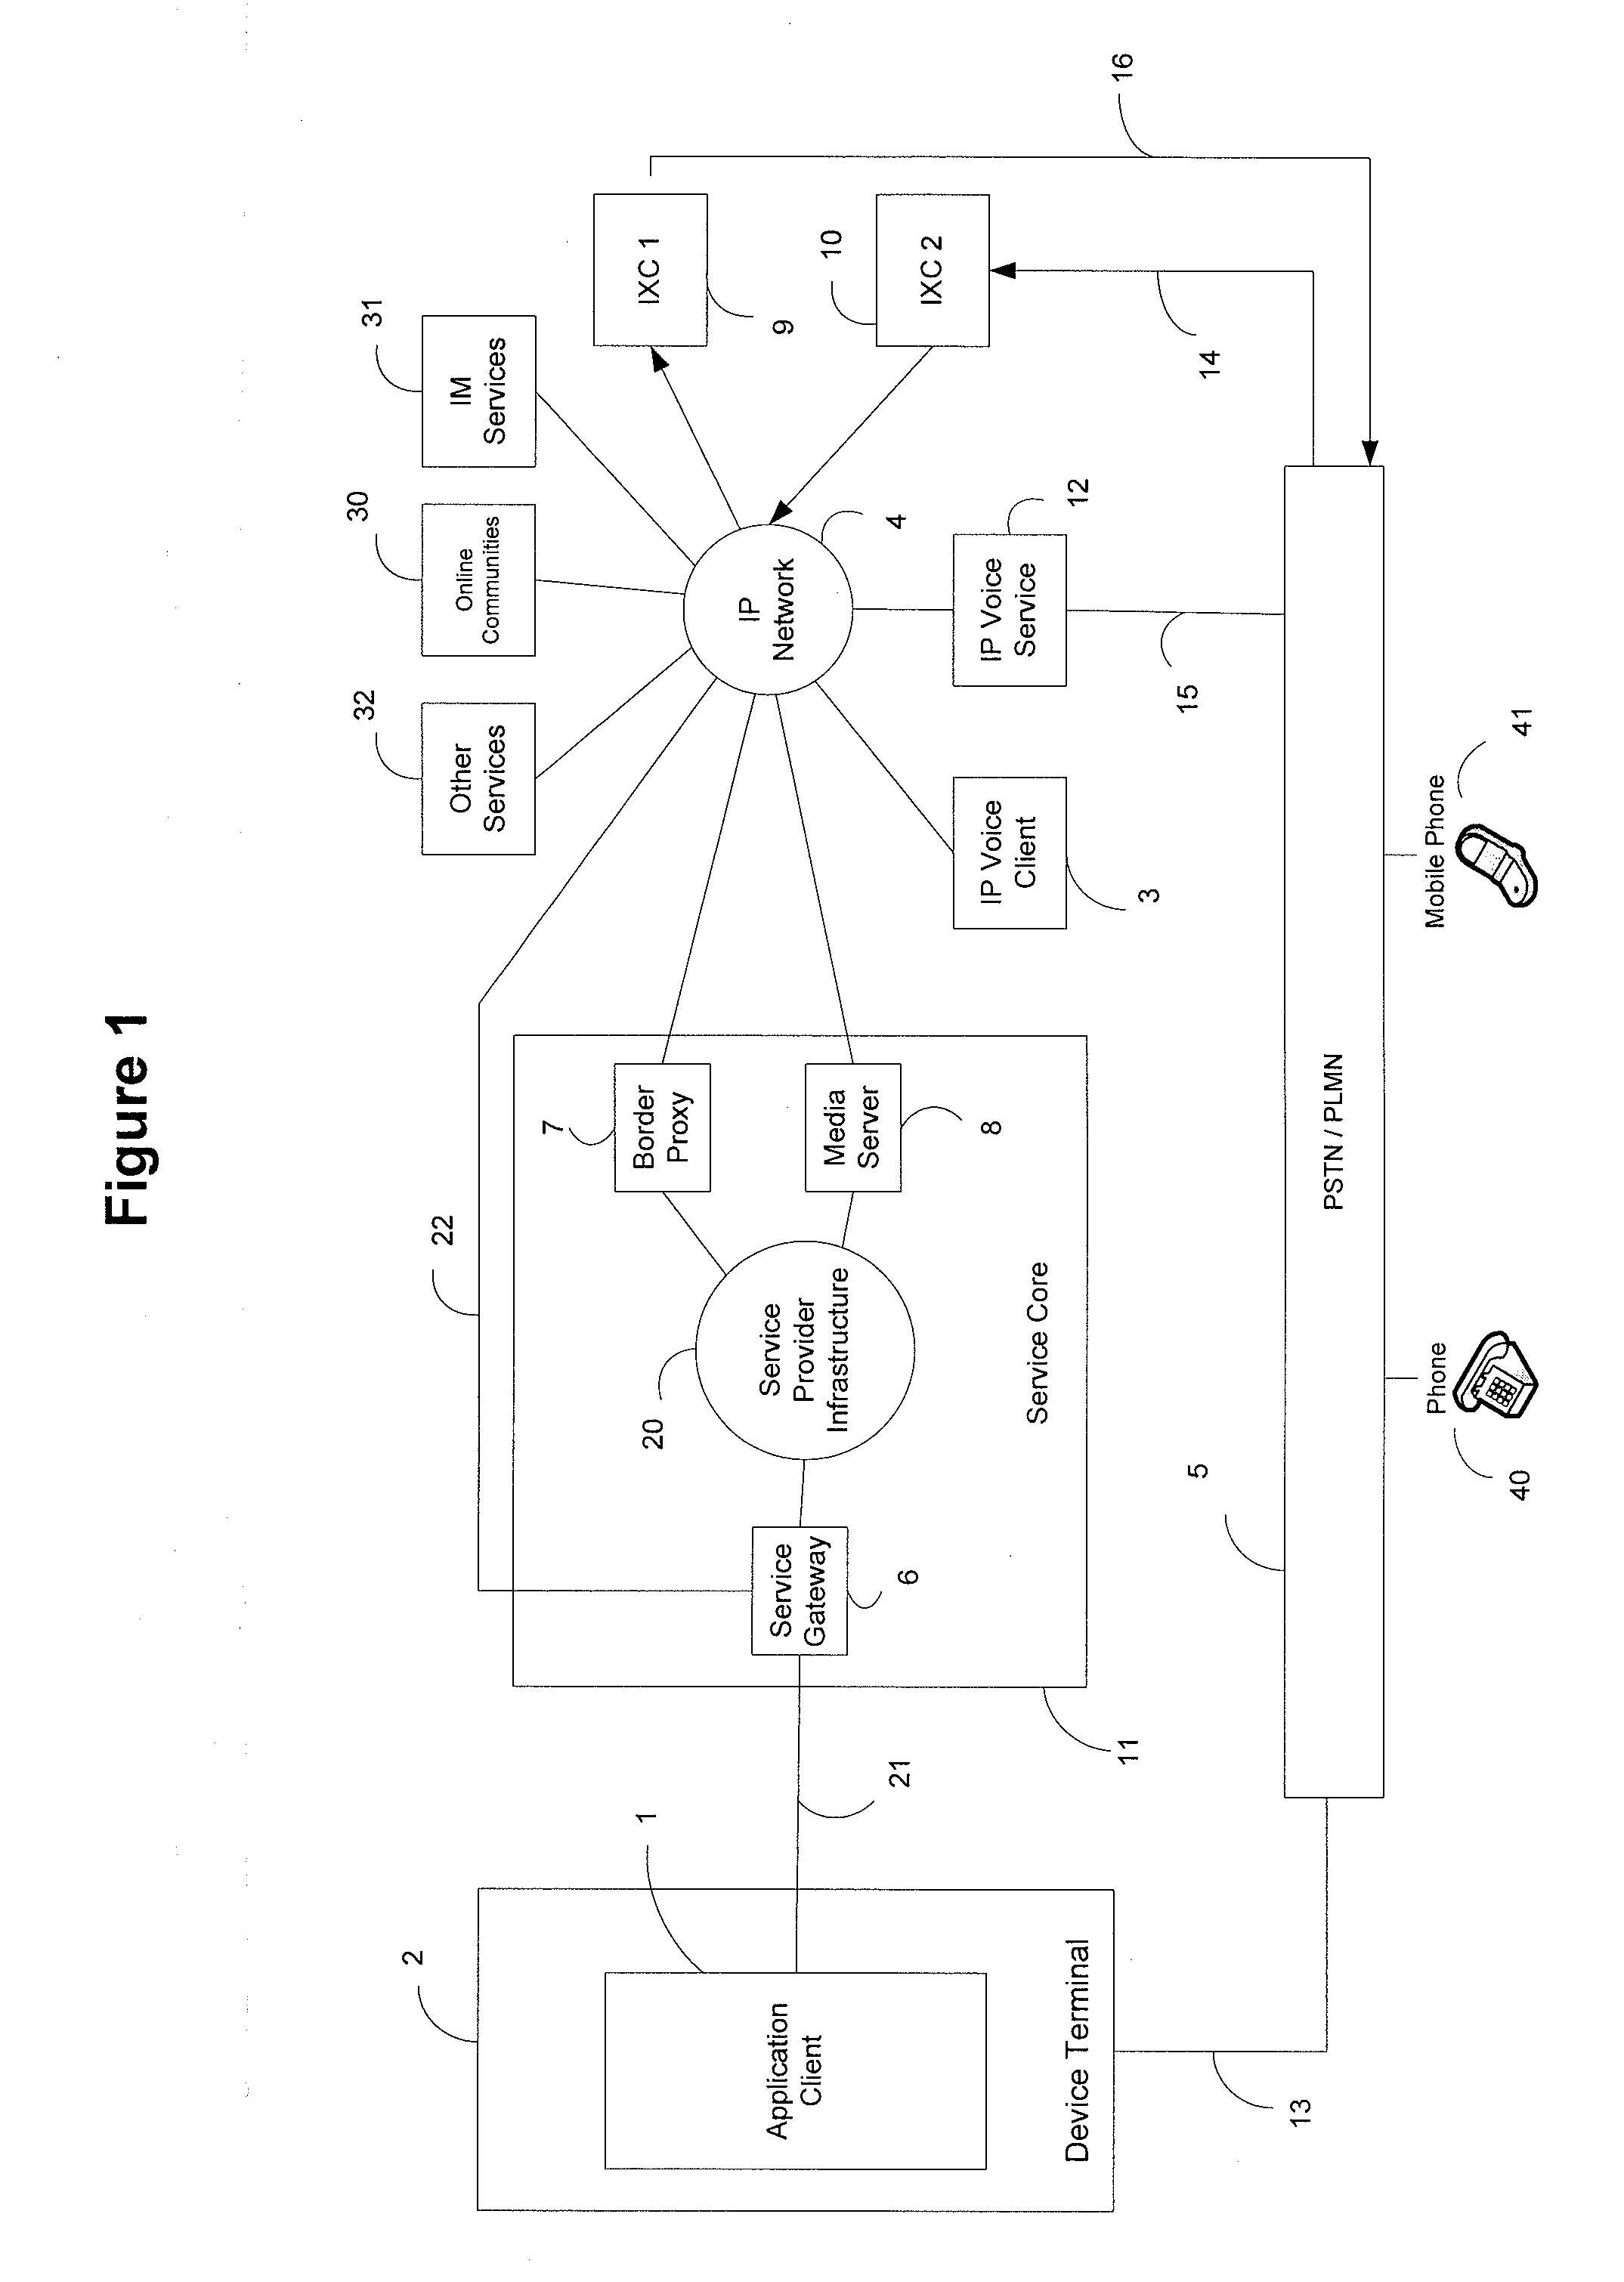 System and methods for using online community identities of users to establish mobile communication sessions